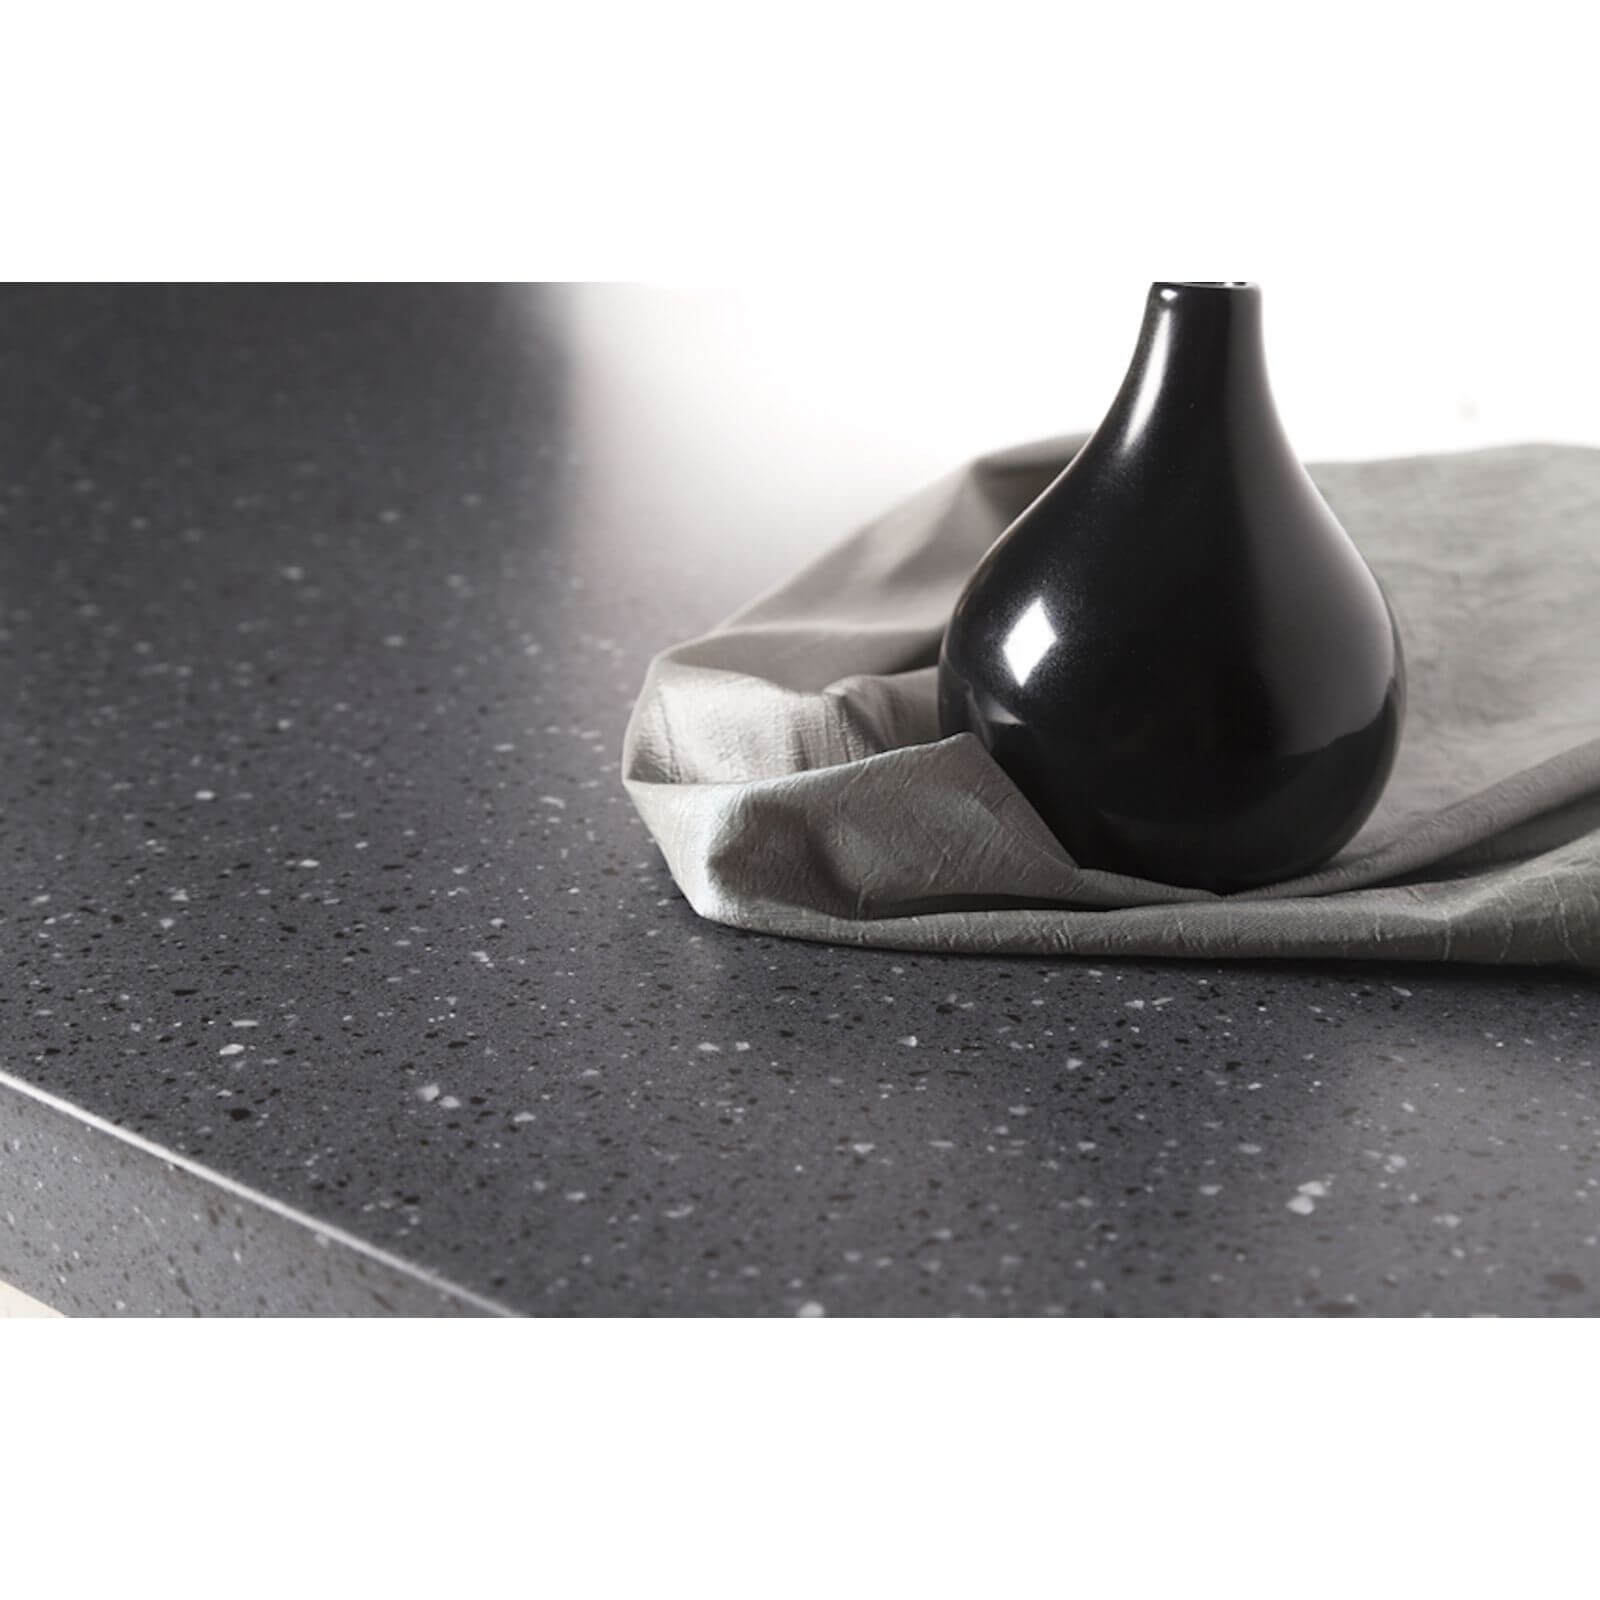 Maia Greystone Kitchen Sink Worktop - Acrylic Super Large Right Hand Bowl - 3600 x 650 x 28mm